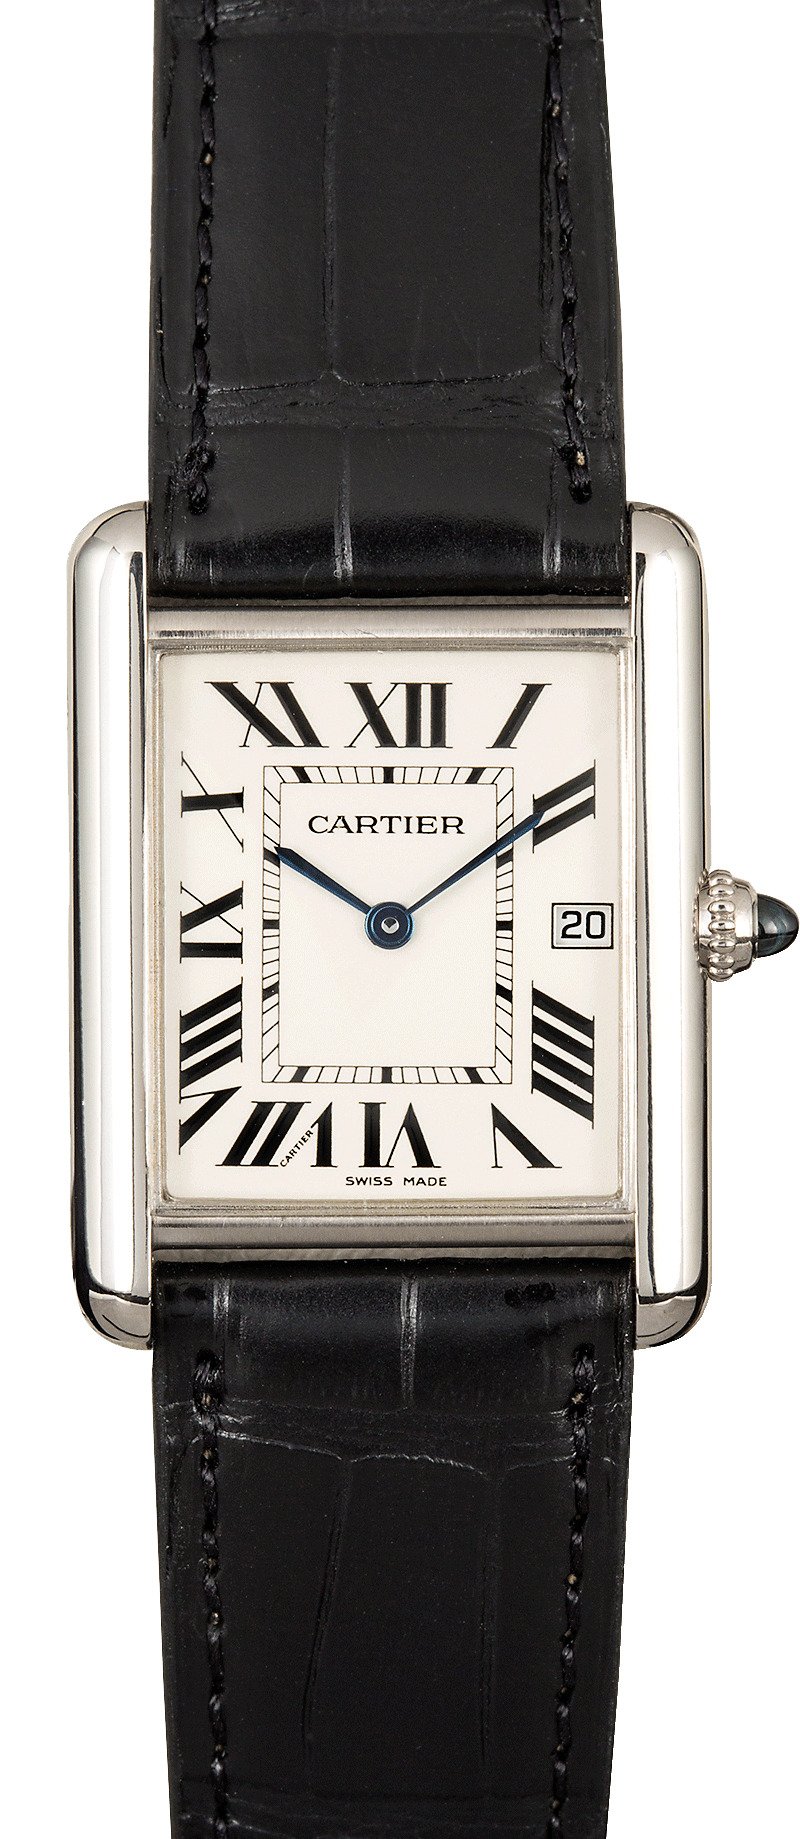 used cartier tank watches